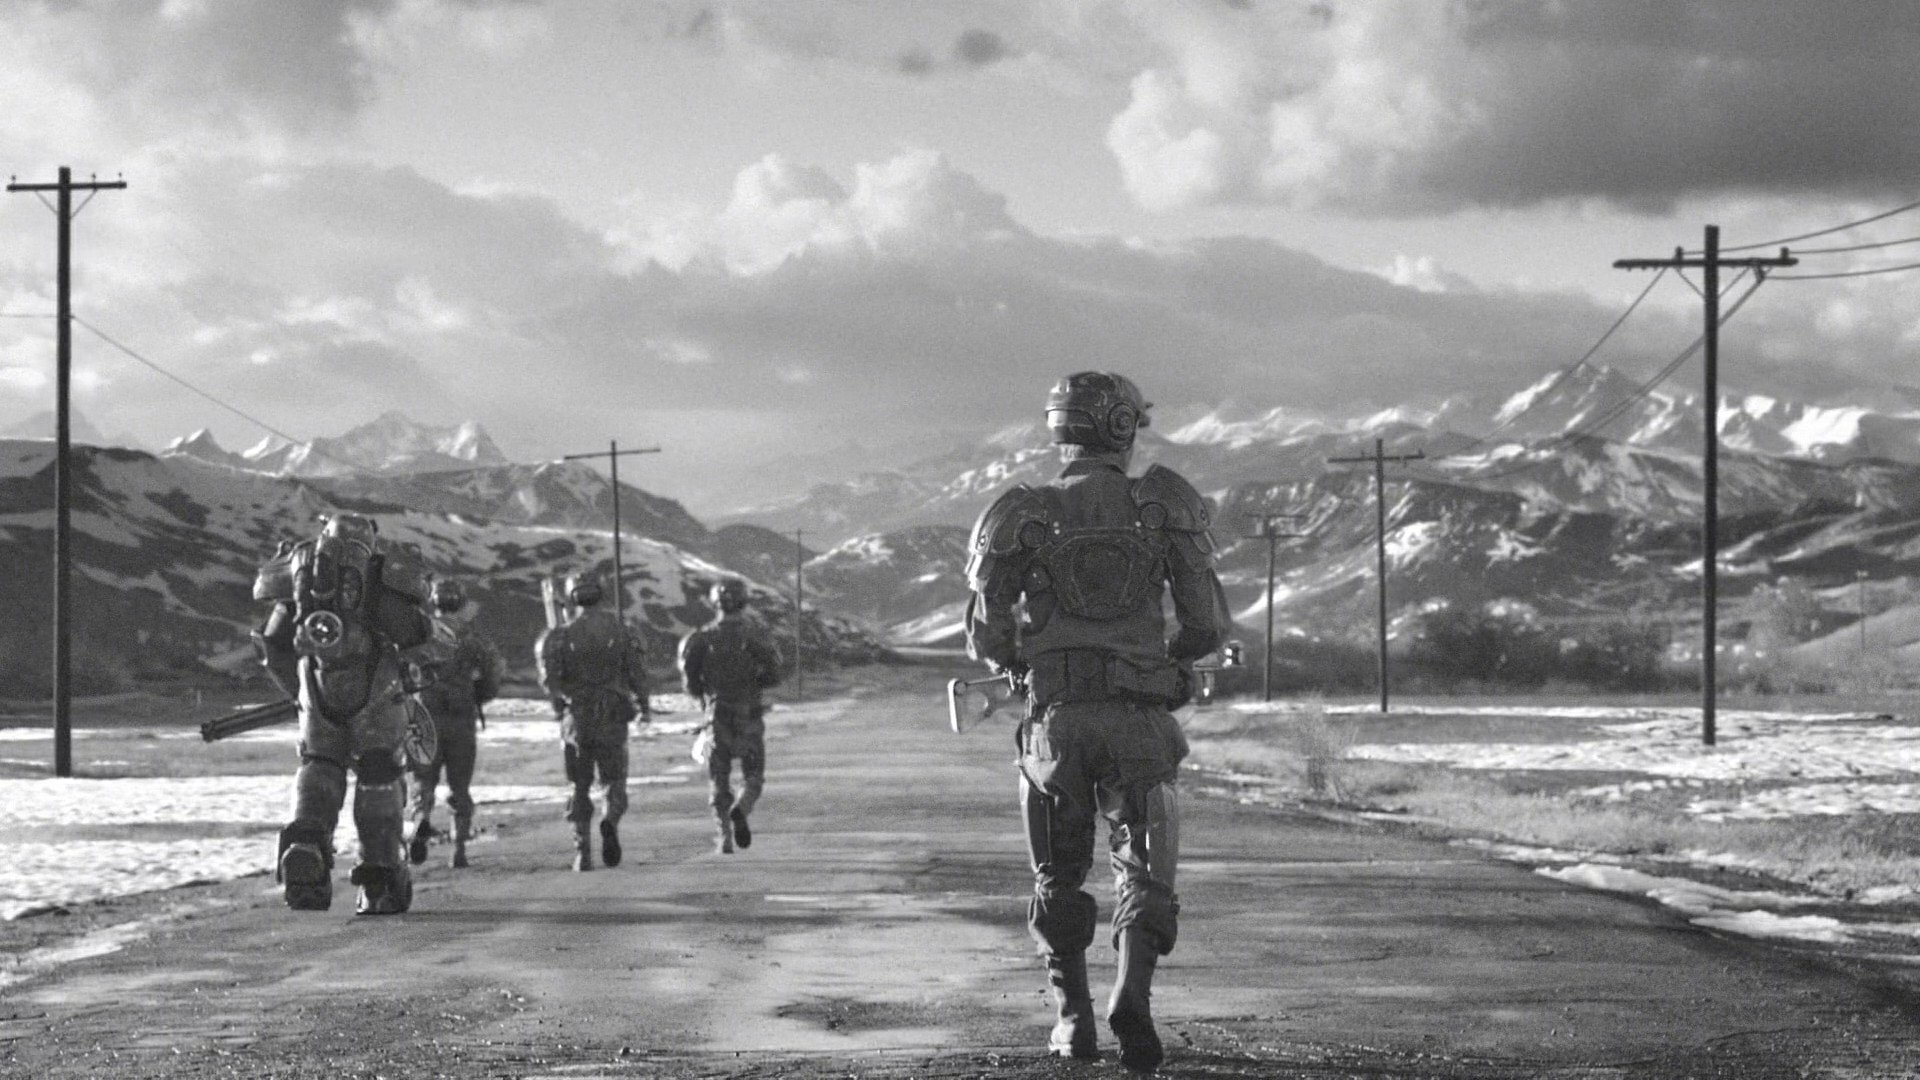 fallout 4 wallpaper,military,soldier,standing,army,black and white